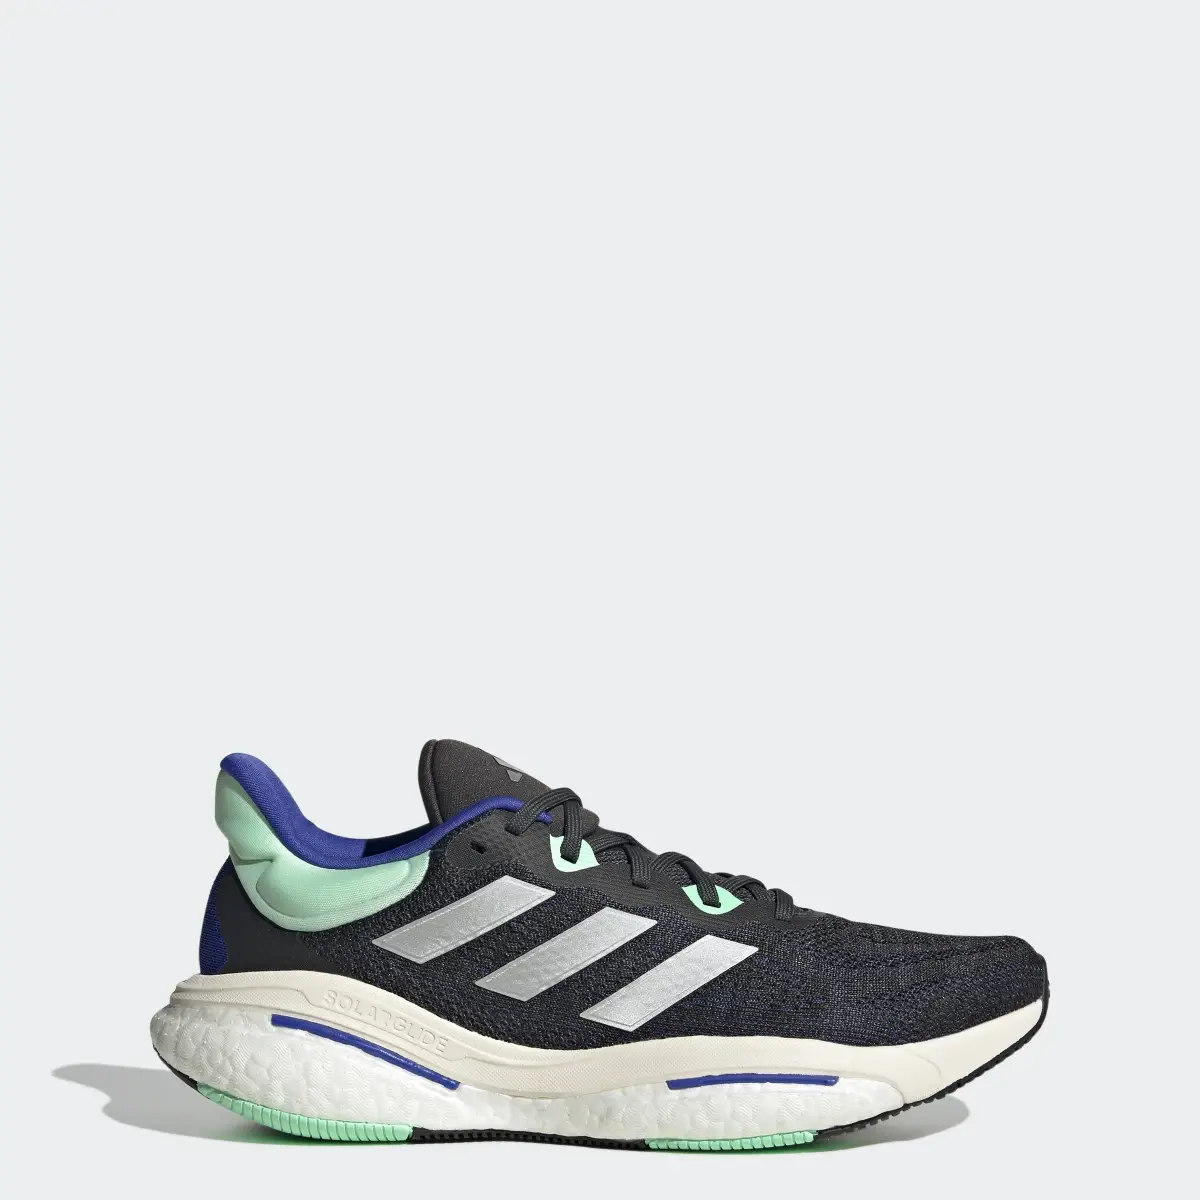 Adidas Solarglide 6 Running Shoes. 1